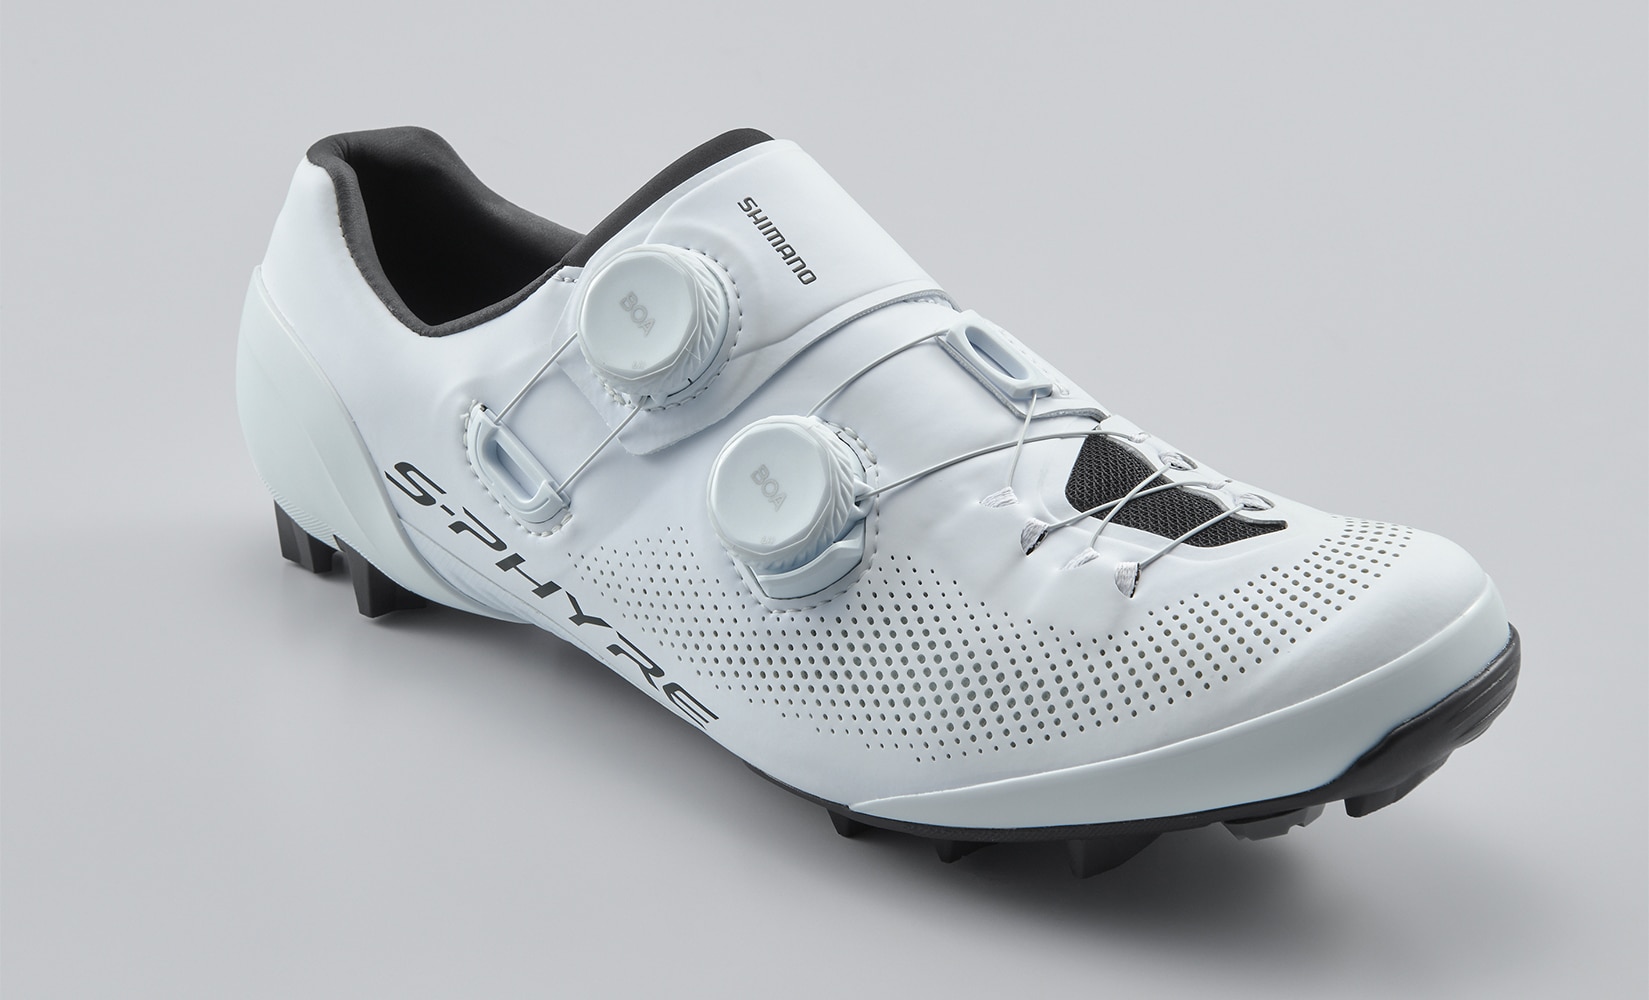 A white pair of Shimano's new SH-XC903 SPD 2-bolt cross-country pro level mountain bike shoes